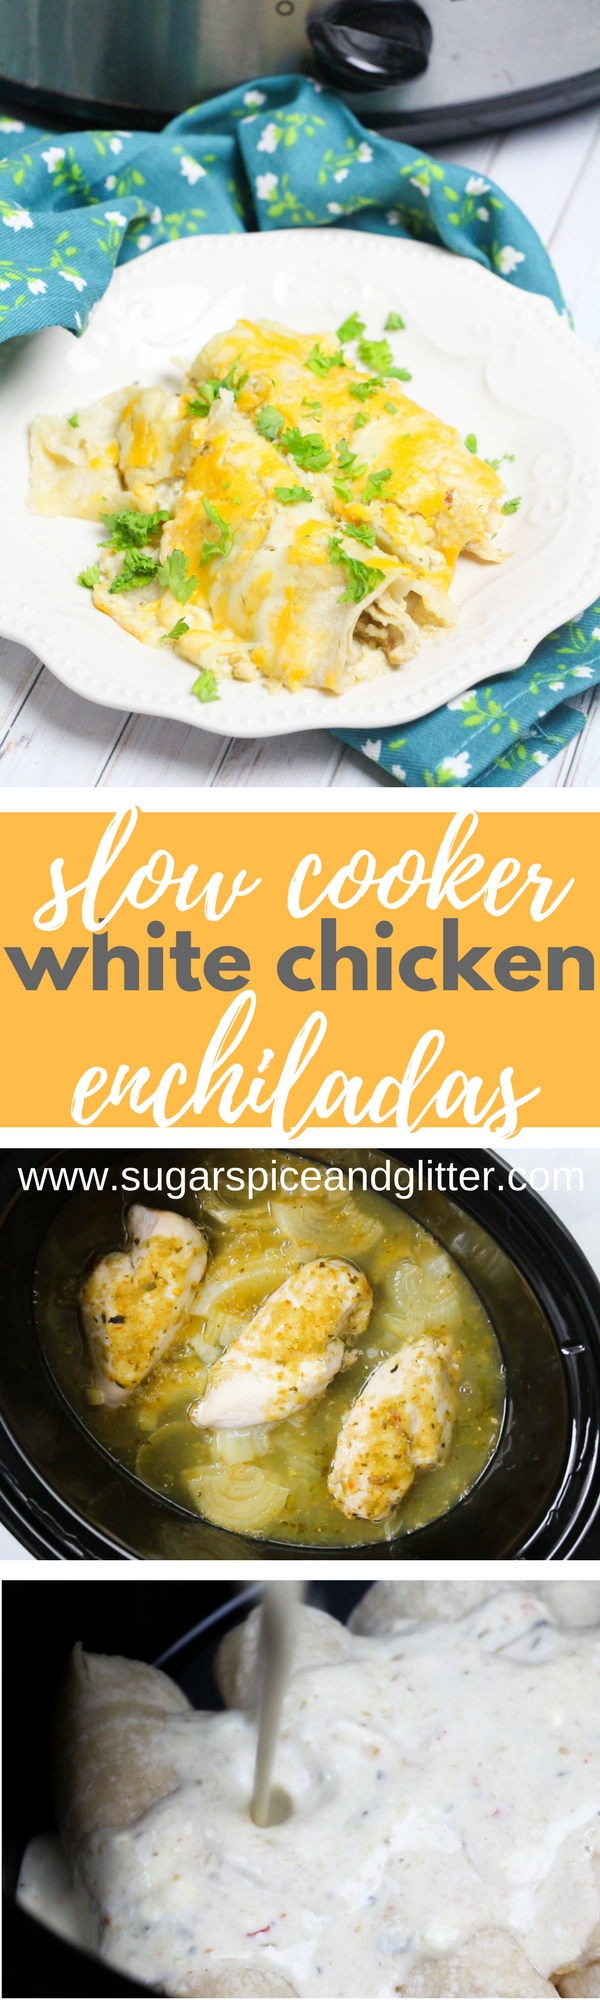 Slow Cooker Green Chicken Enchiladas (with Video)